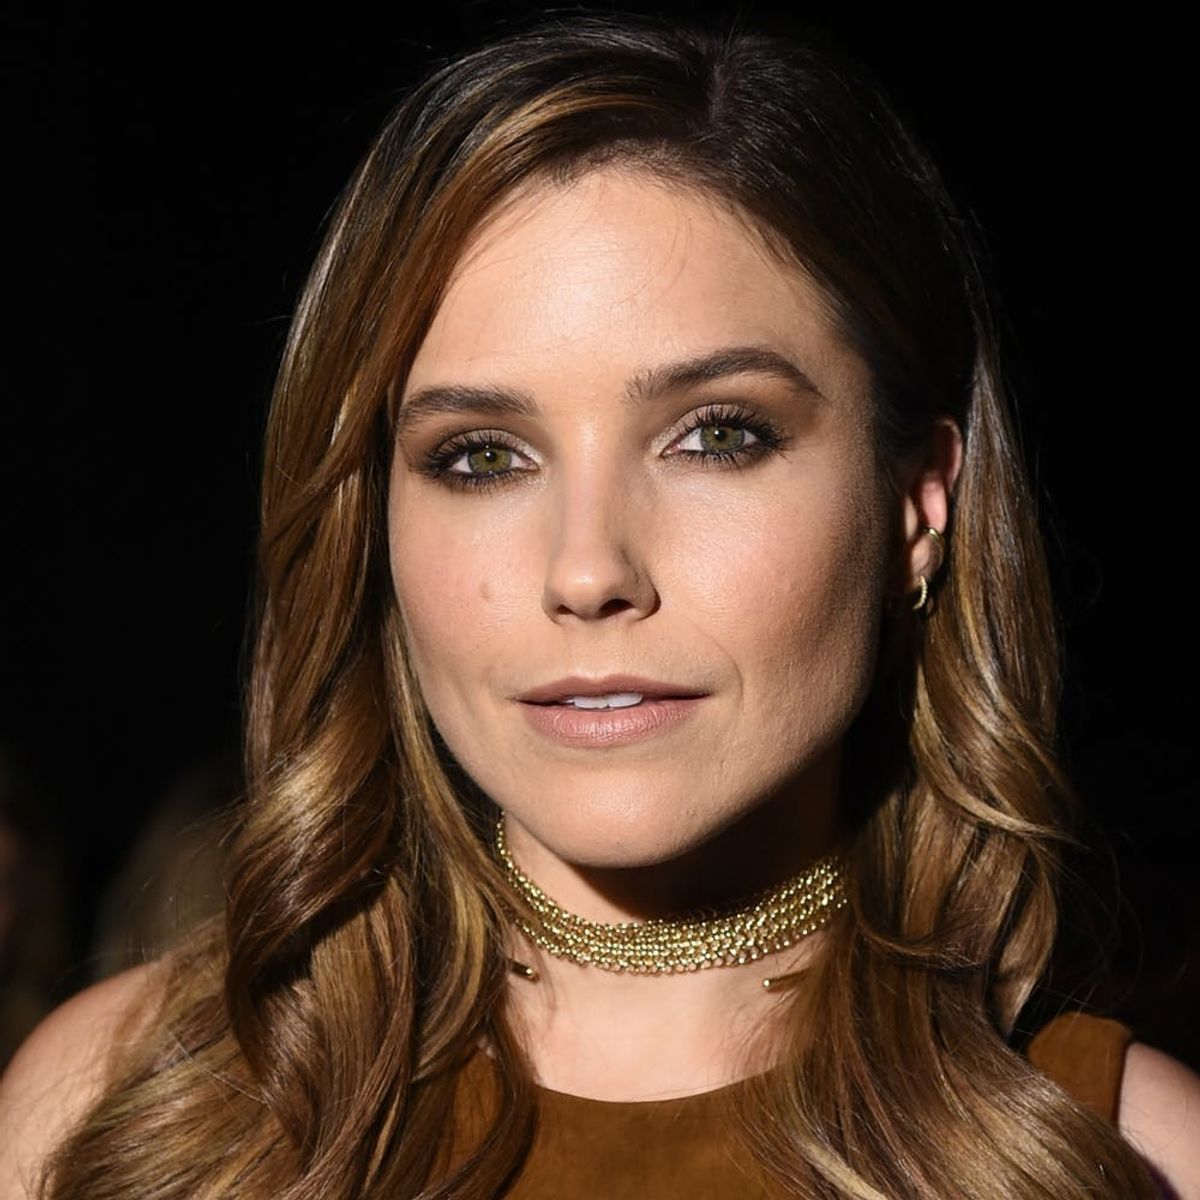 Sophia Bush Just Stood Up for Women Everywhere With Her Open Letter to a Male Harasser